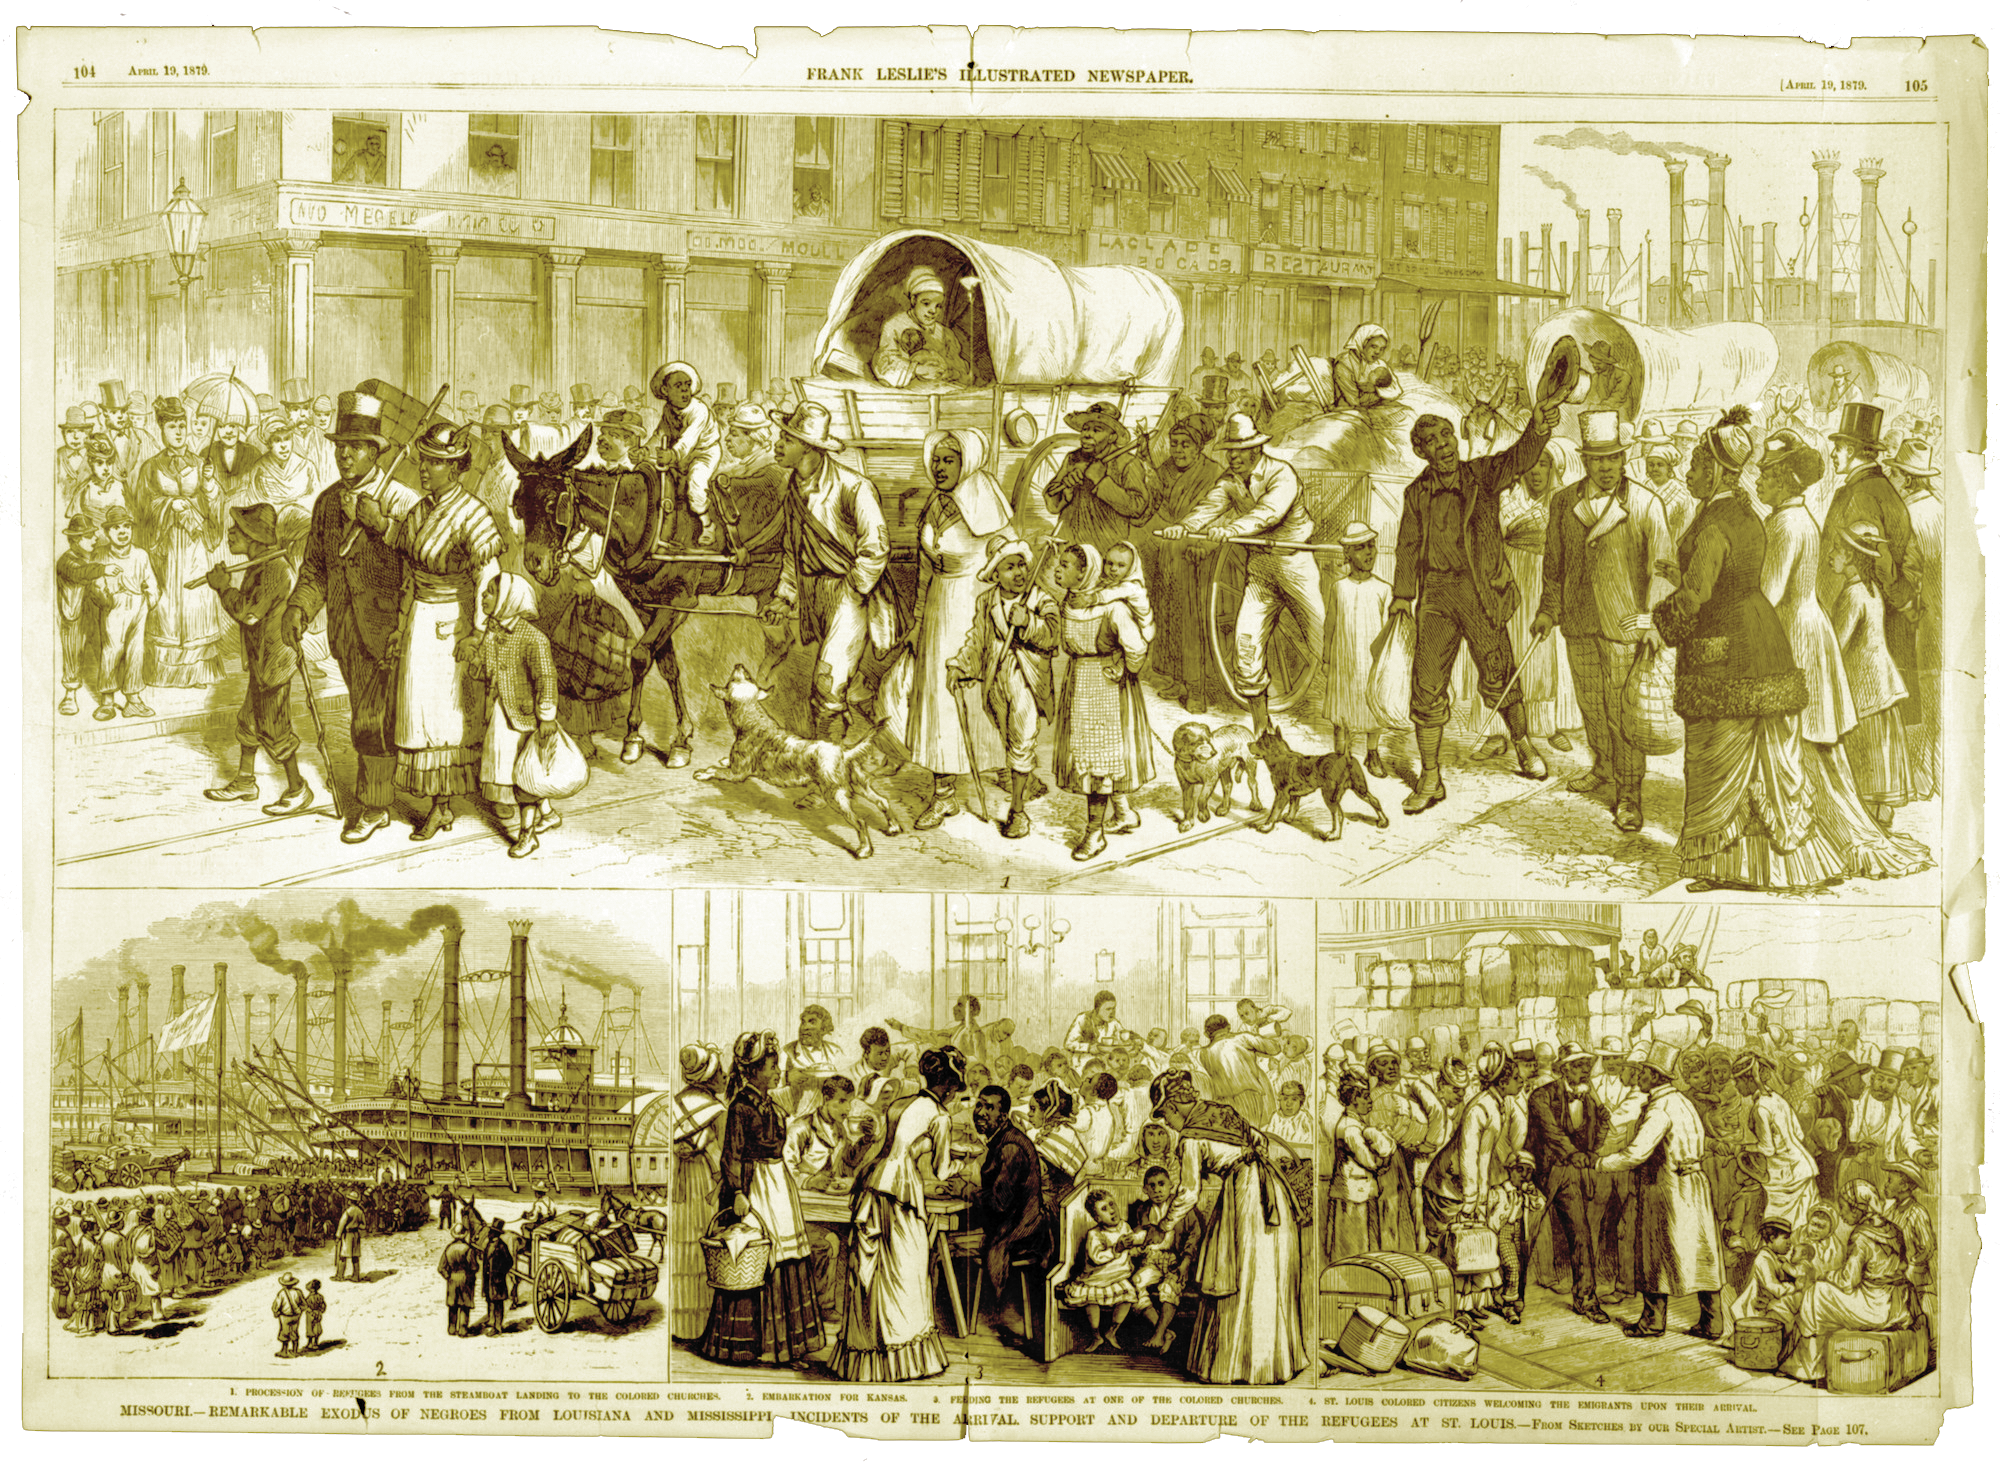  An adapted print from Frank Leslie’s Illustrated Newspaper, which depicts blacks heading to Kansas via St. Louis in 1879. This illustration highlights scenes of the Exoduster experience in St. Louis, which included thousands who traveled through St.